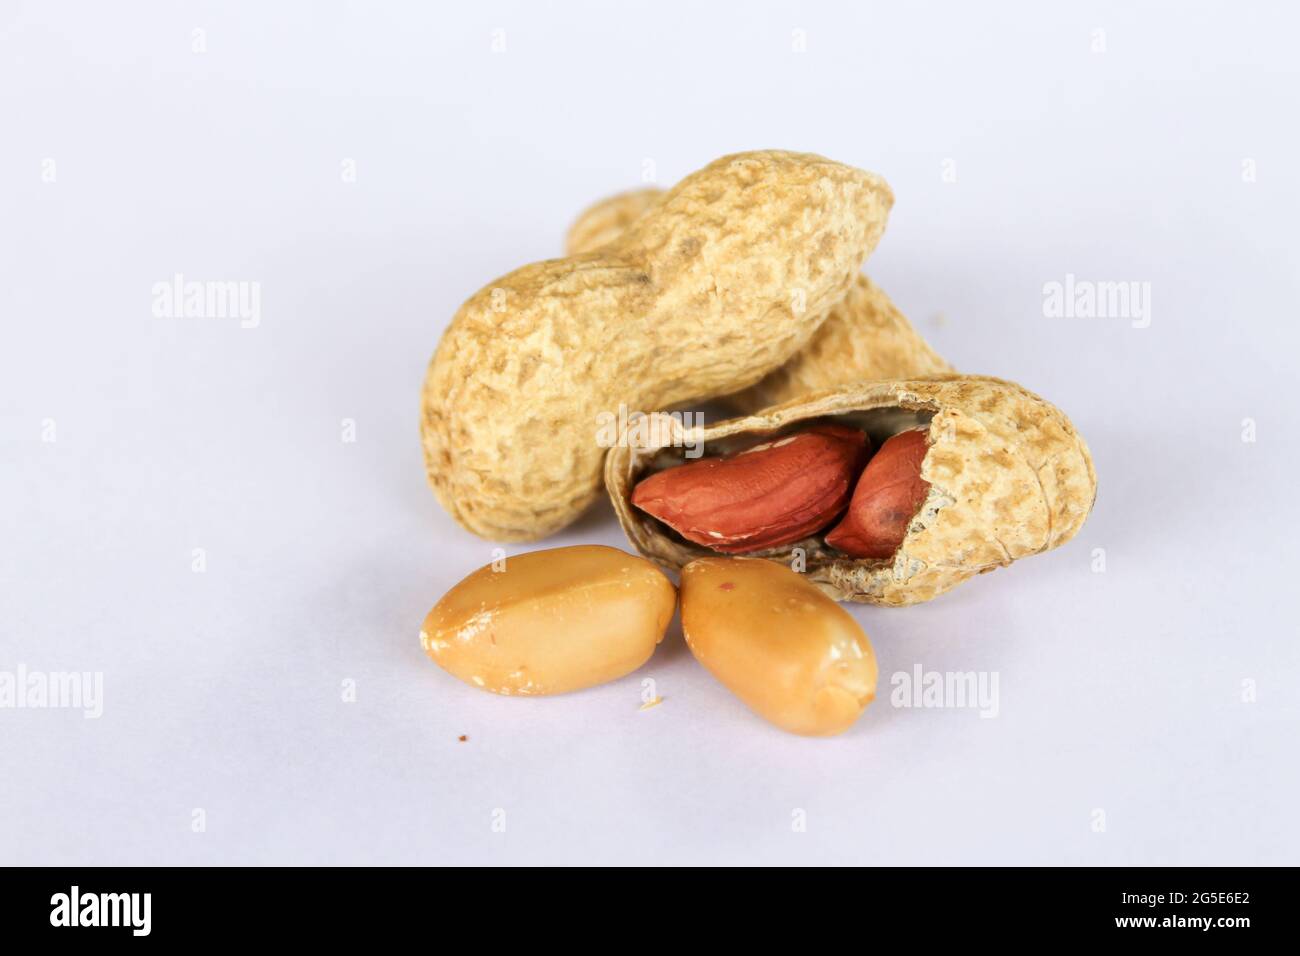 Peanuts isolated on white background . Two kernels are already unpacked. One of the peanuts, which was removed, revealed a red seed on the side. Stock Photo